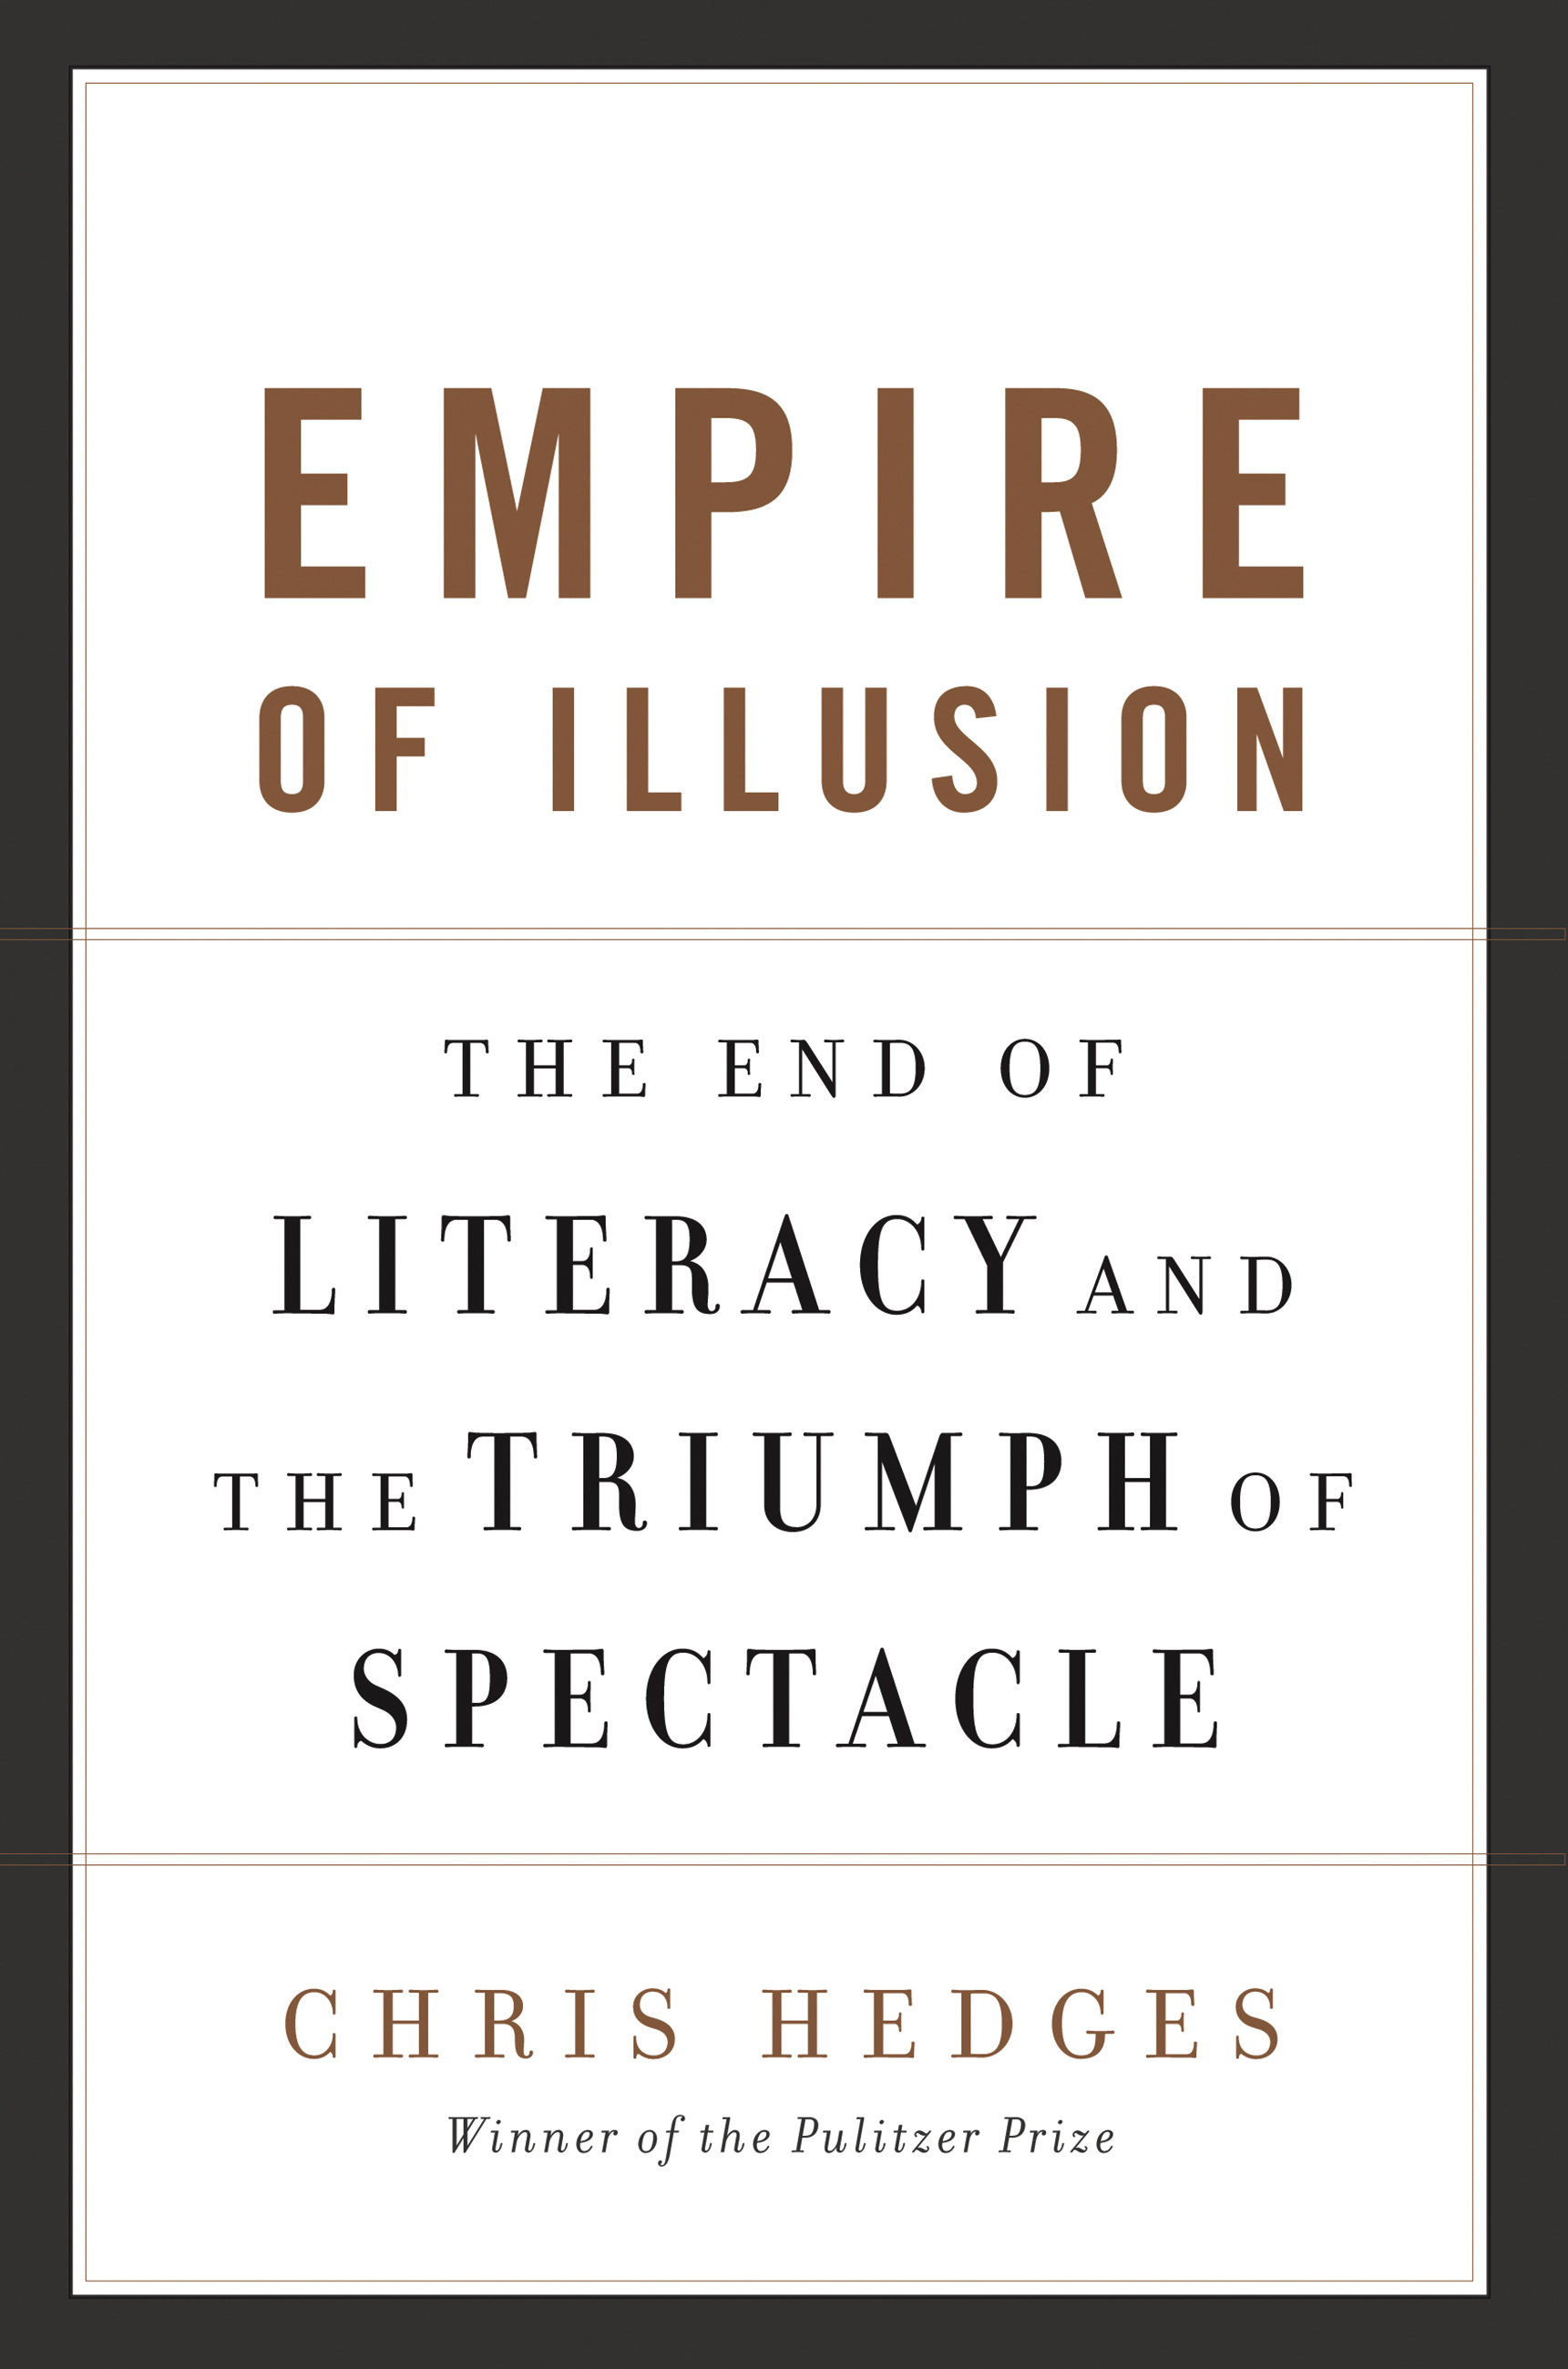 Empire of Illusion by Chris Hedges Hachette Book Group